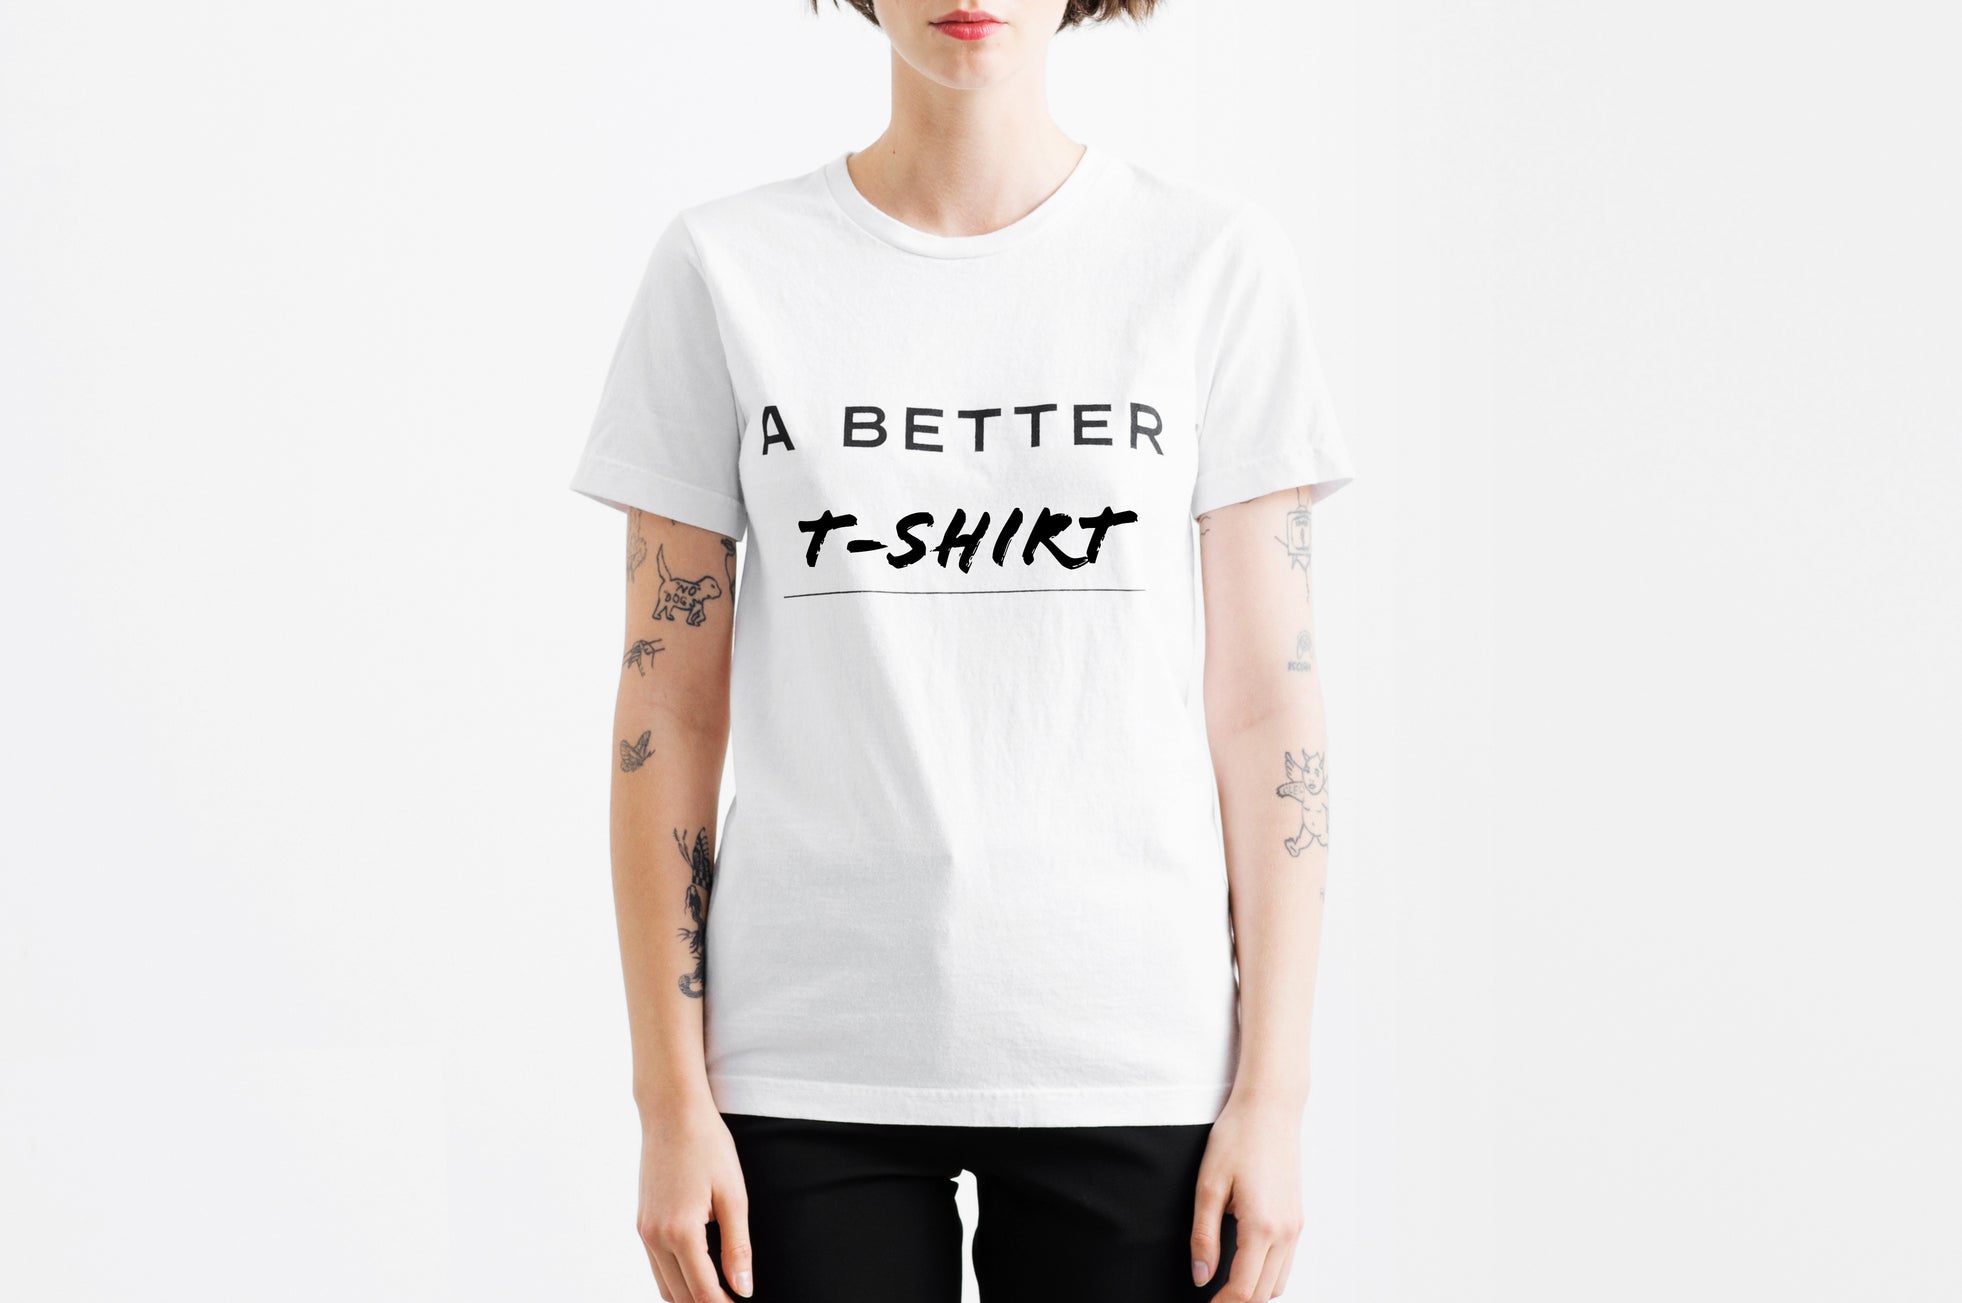 A Better Shirt - Sample Sale in Women's Shirt in White image 2